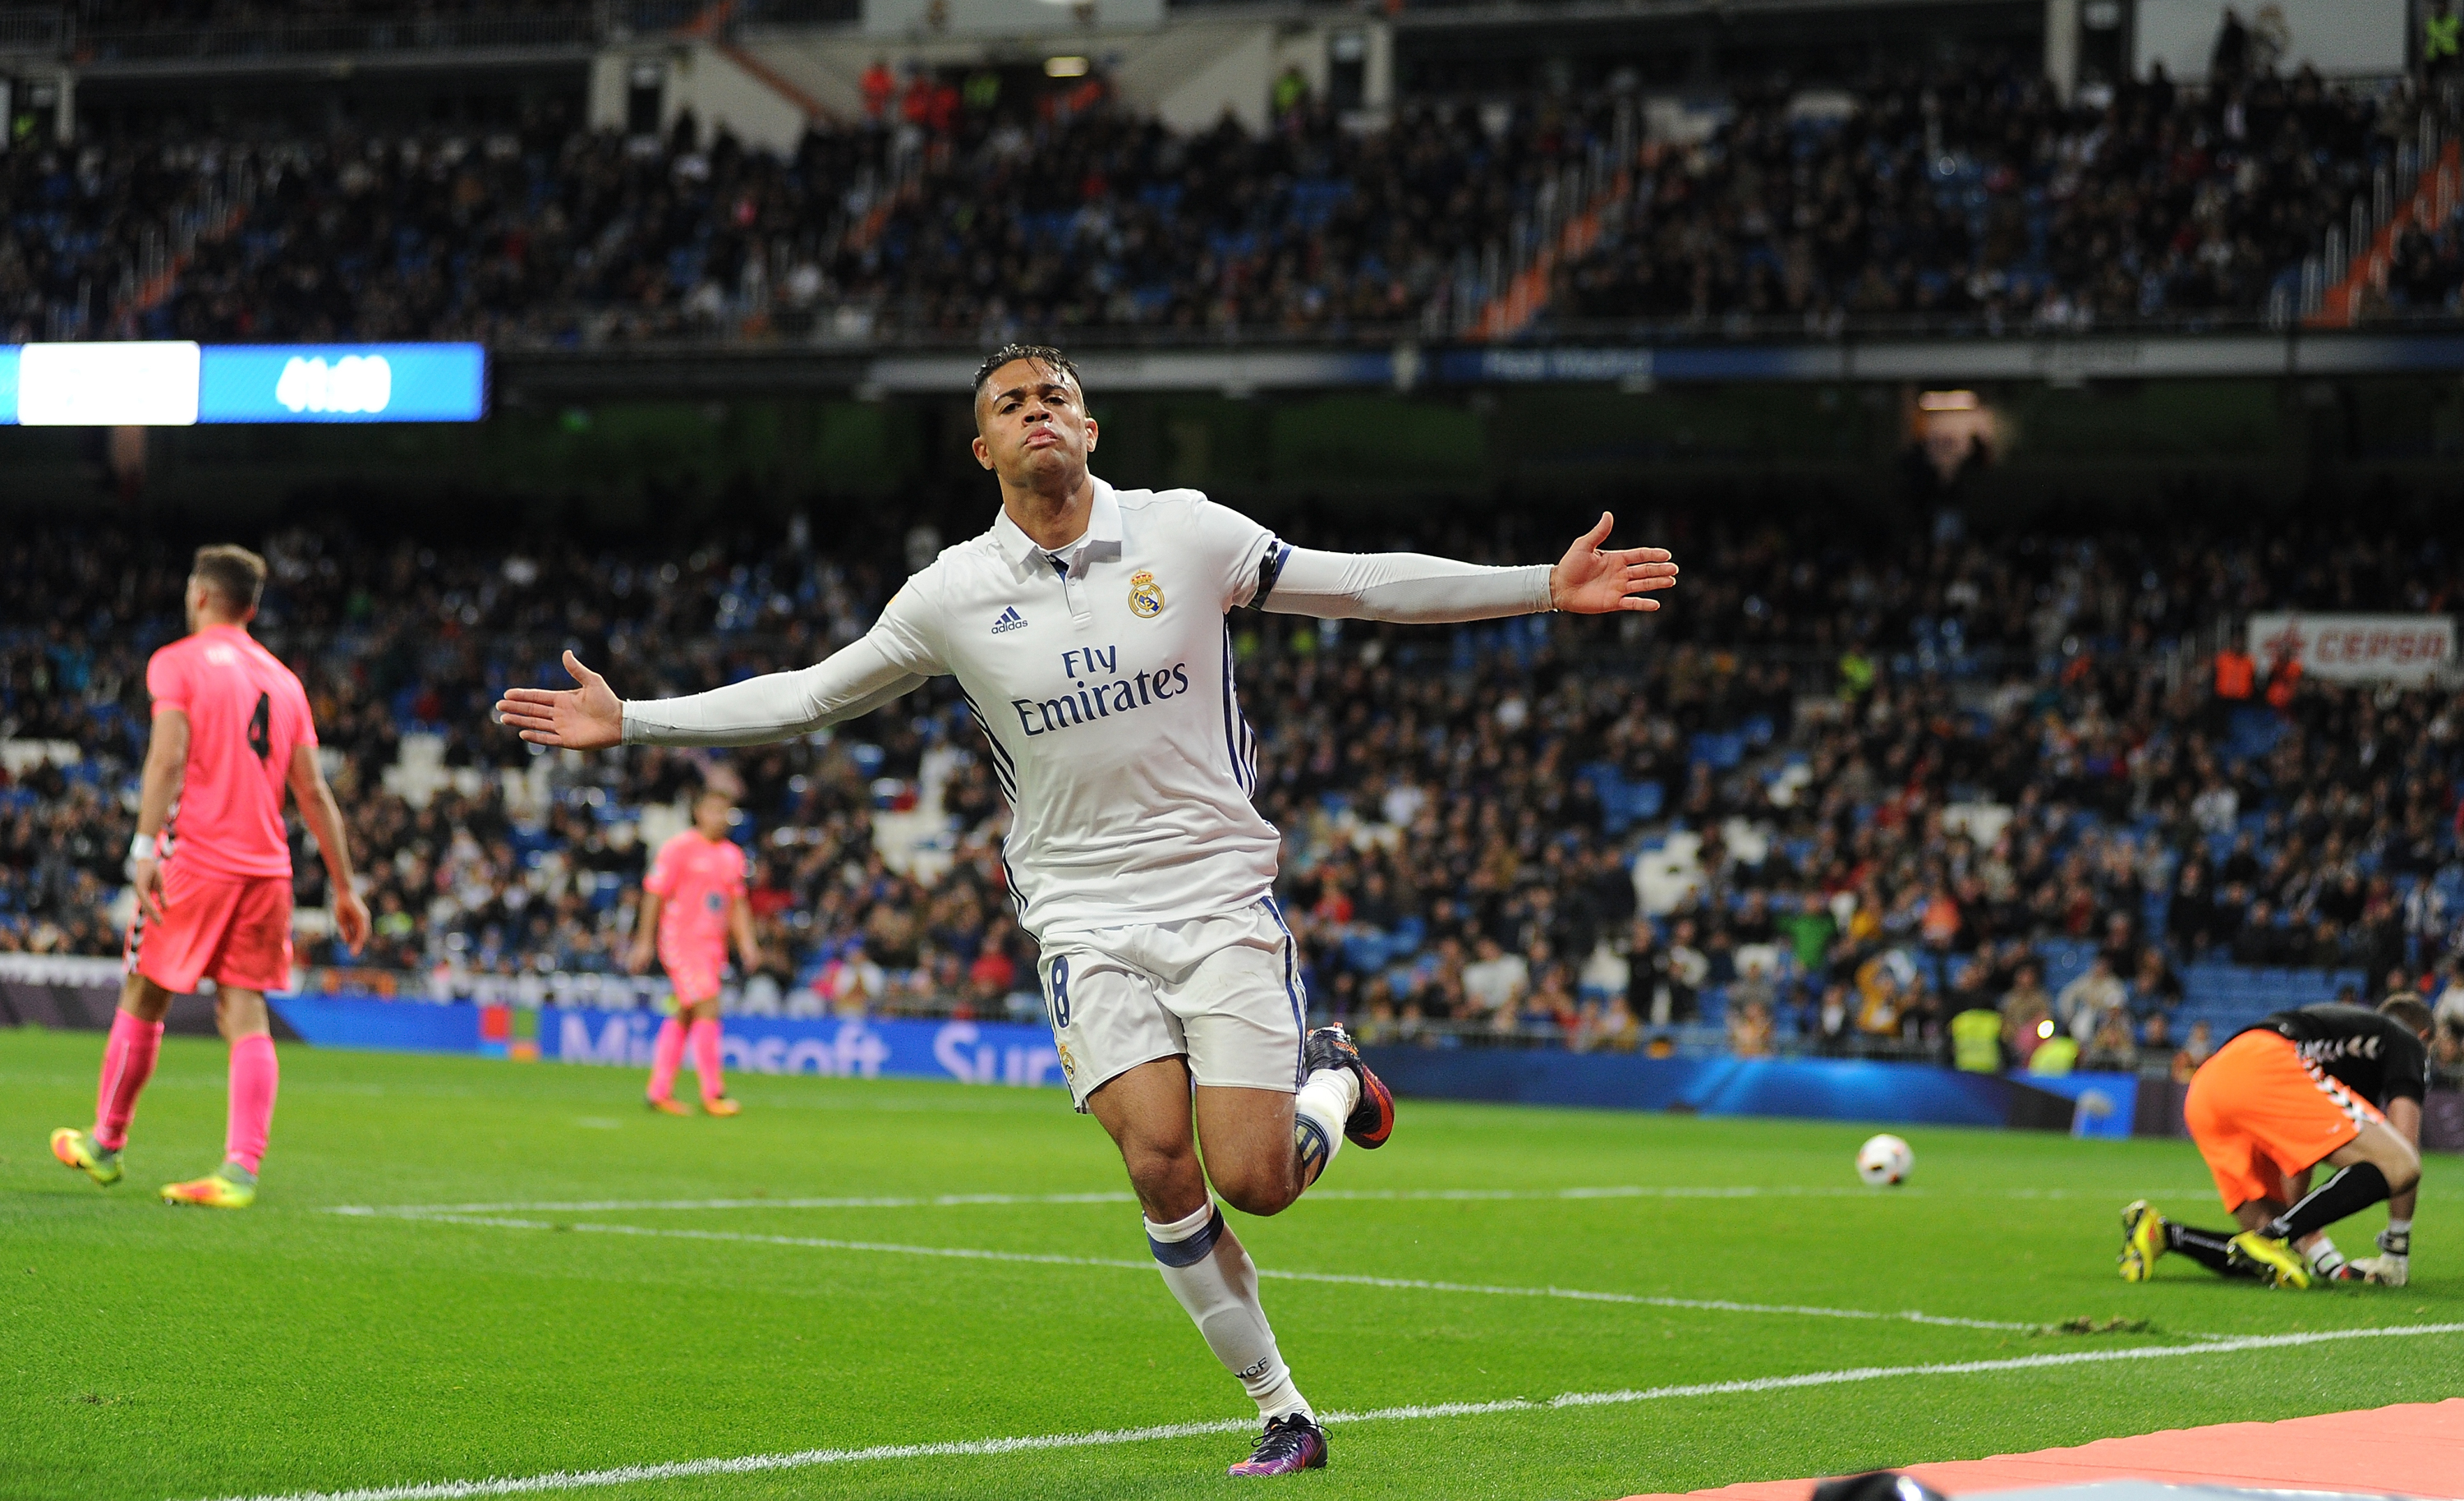 MADRID, SPAIN - NOVEMBER 30:  Mariano Diaz Mejia of Real Madrid CF celebrates after scoring Real's 3rd goal during the Copa del Rey last of 32 match between Real Madrid and Cultural Leonesa at estadio Santiago Bernabeu on November 30, 2016 in Madrid, Spain.  (Photo by Denis Doyle/Getty Images)